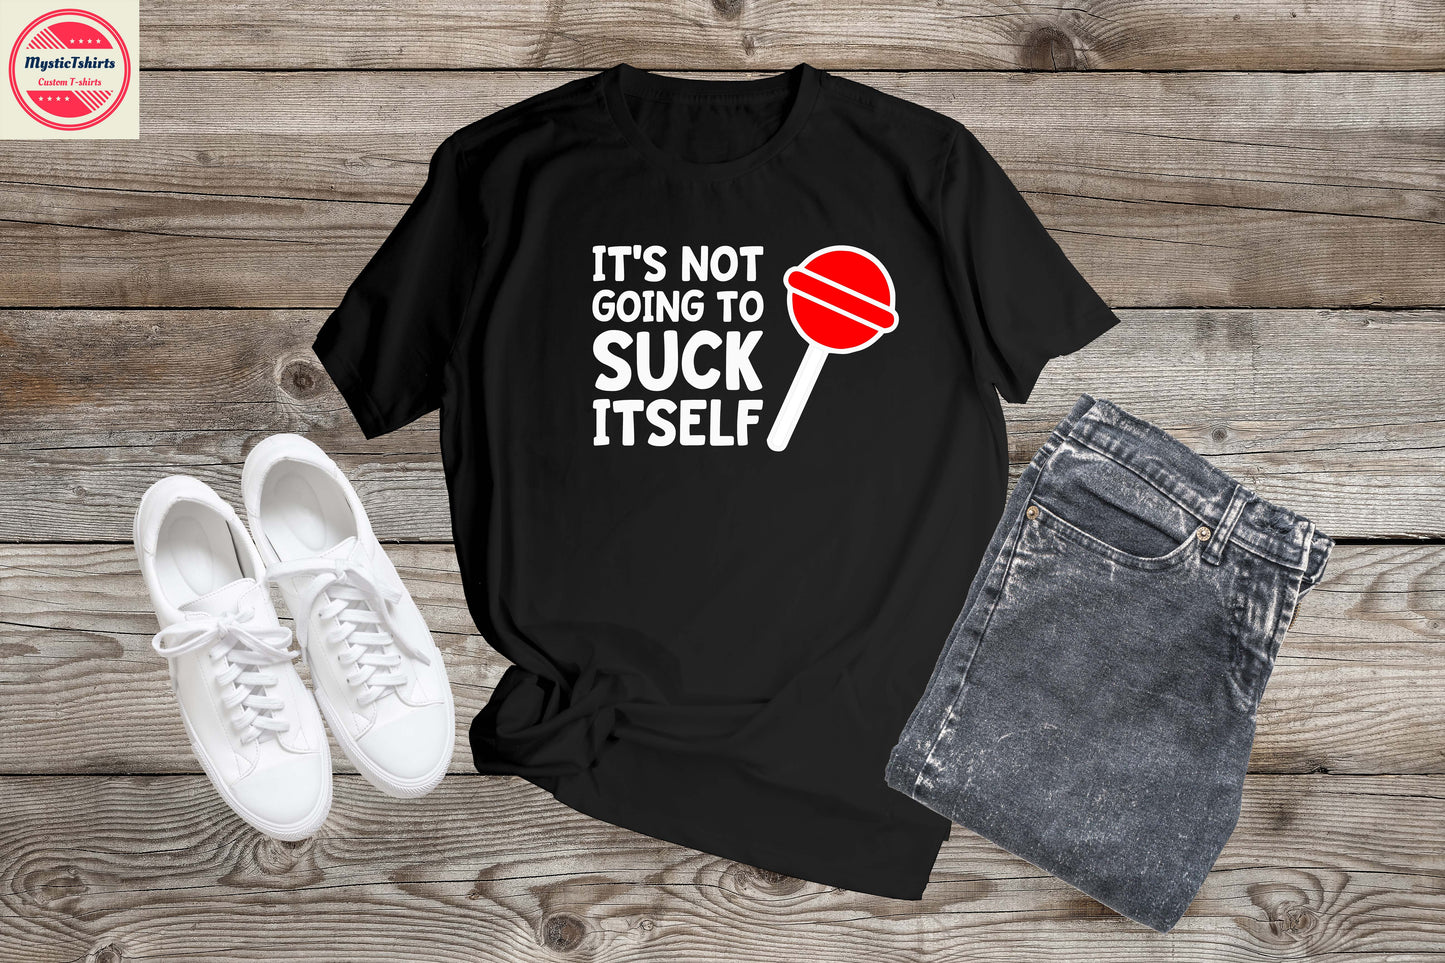 257. IT'S NOT GOING TO SUCK ITSELF, Personalized T-Shirt, Custom Text, Make Your Own Shirt, Custom Tee